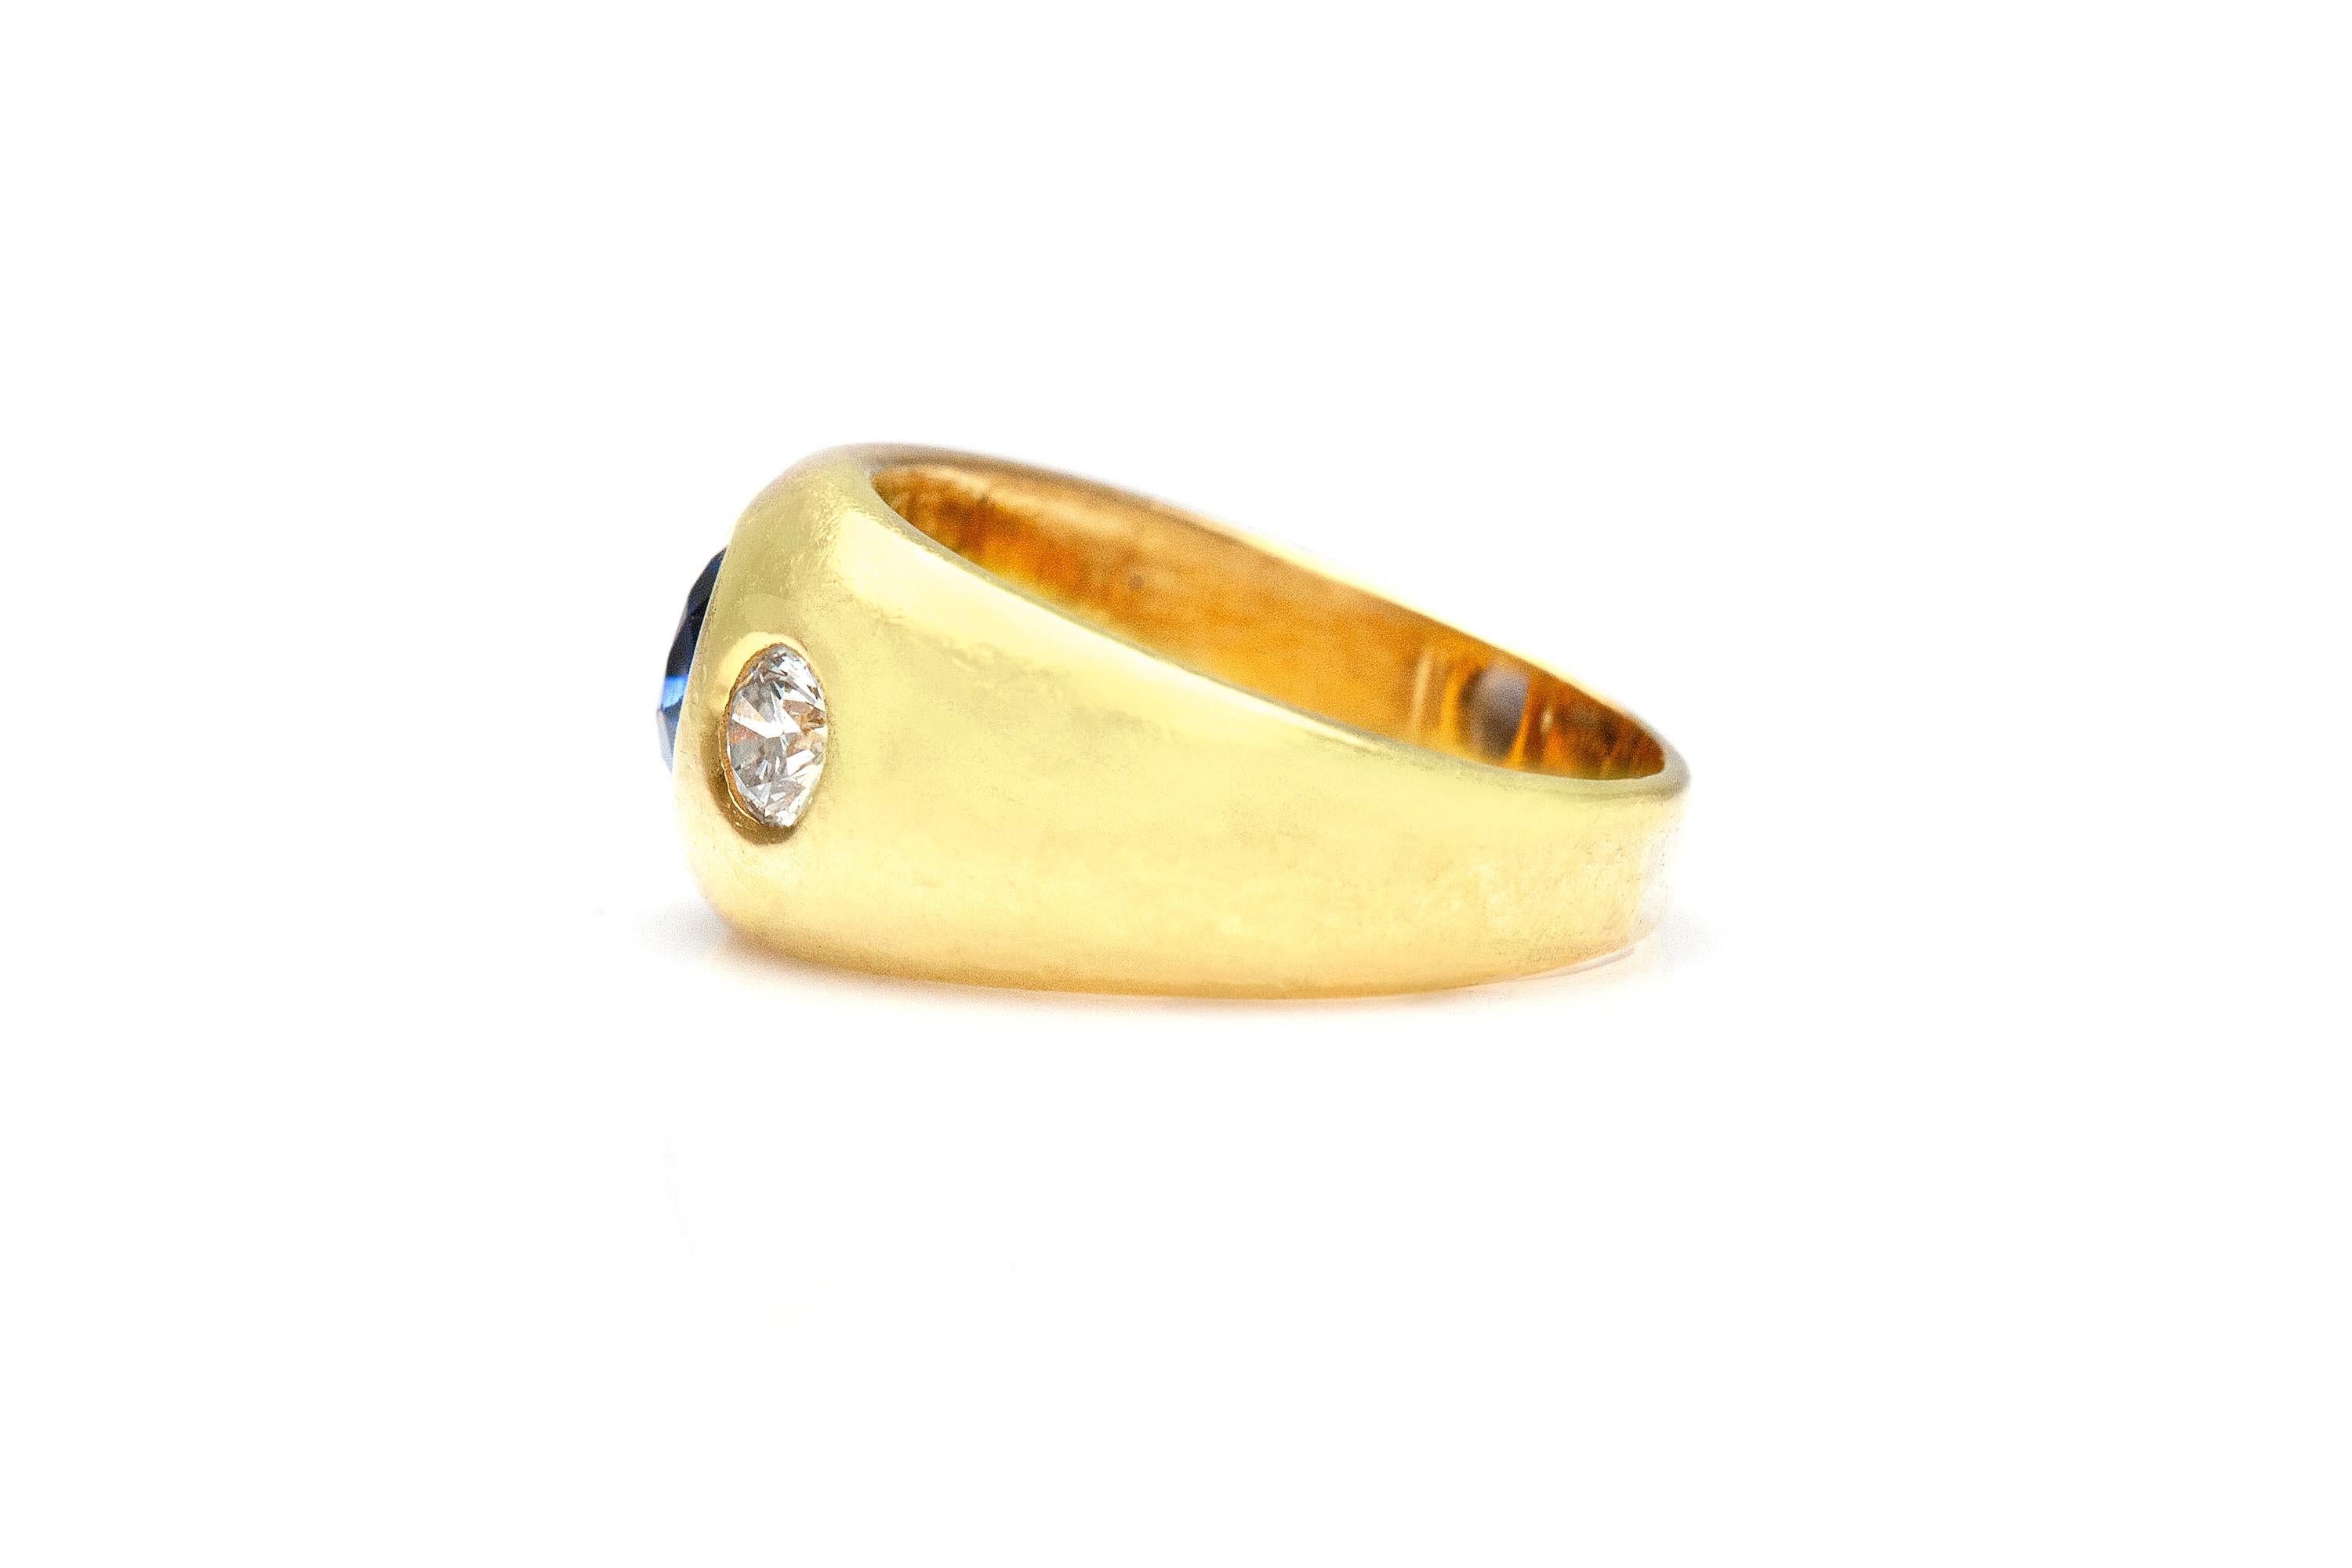 Finely crafted in 18K yellow gold with a center sapphire stone weighing 1.53 carats and two side diamonds weighing 0.36 carat each. Signed by Bvlgari.